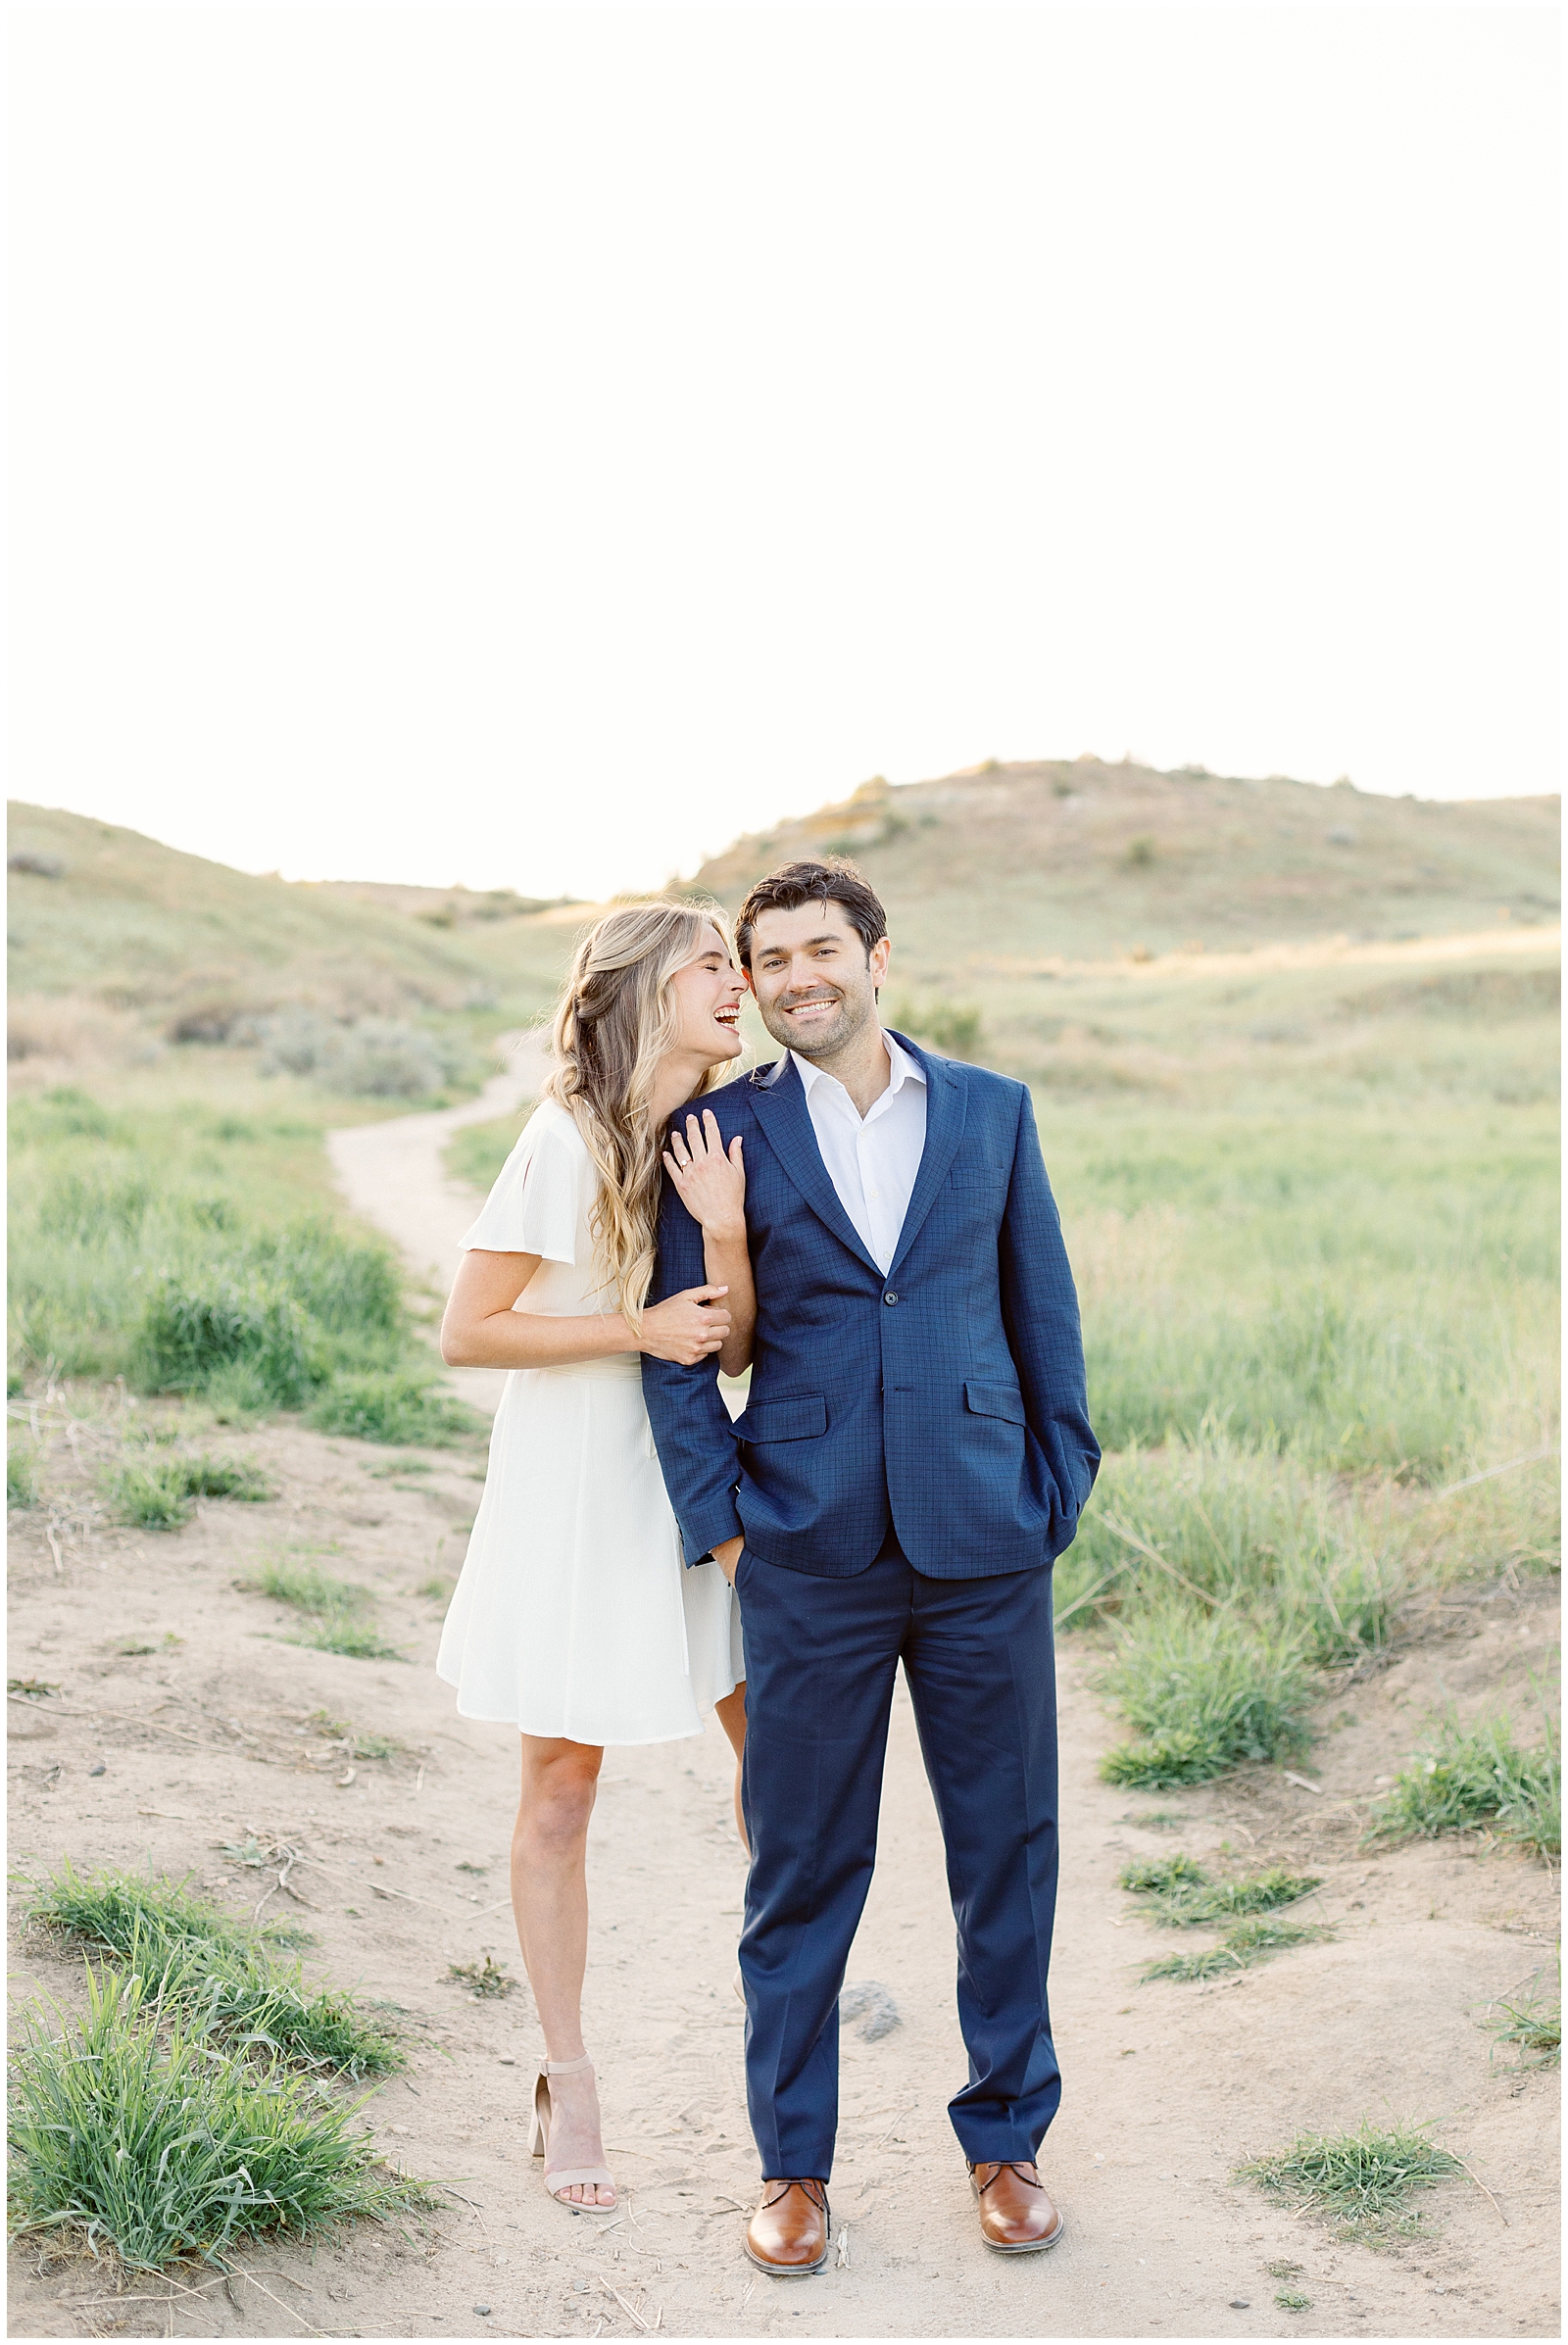 Bride Admiring her husband to be - Boise Foothills Engagement Session